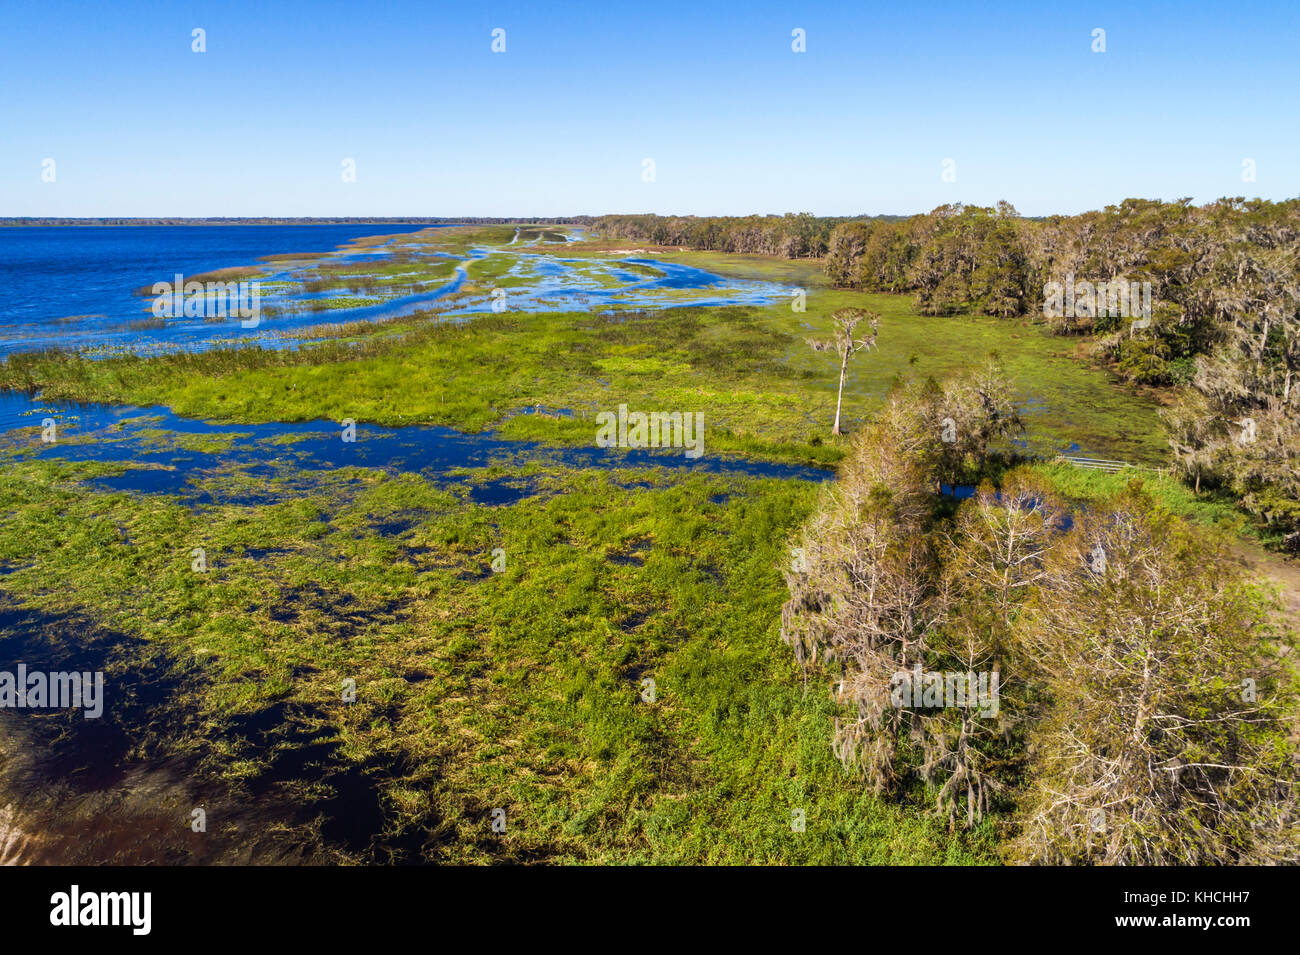 Florida,Kenansville,Cypress Lake,water,shore,trees,aerial overhead view,USA US United States America North American,FL17103015d Stock Photo